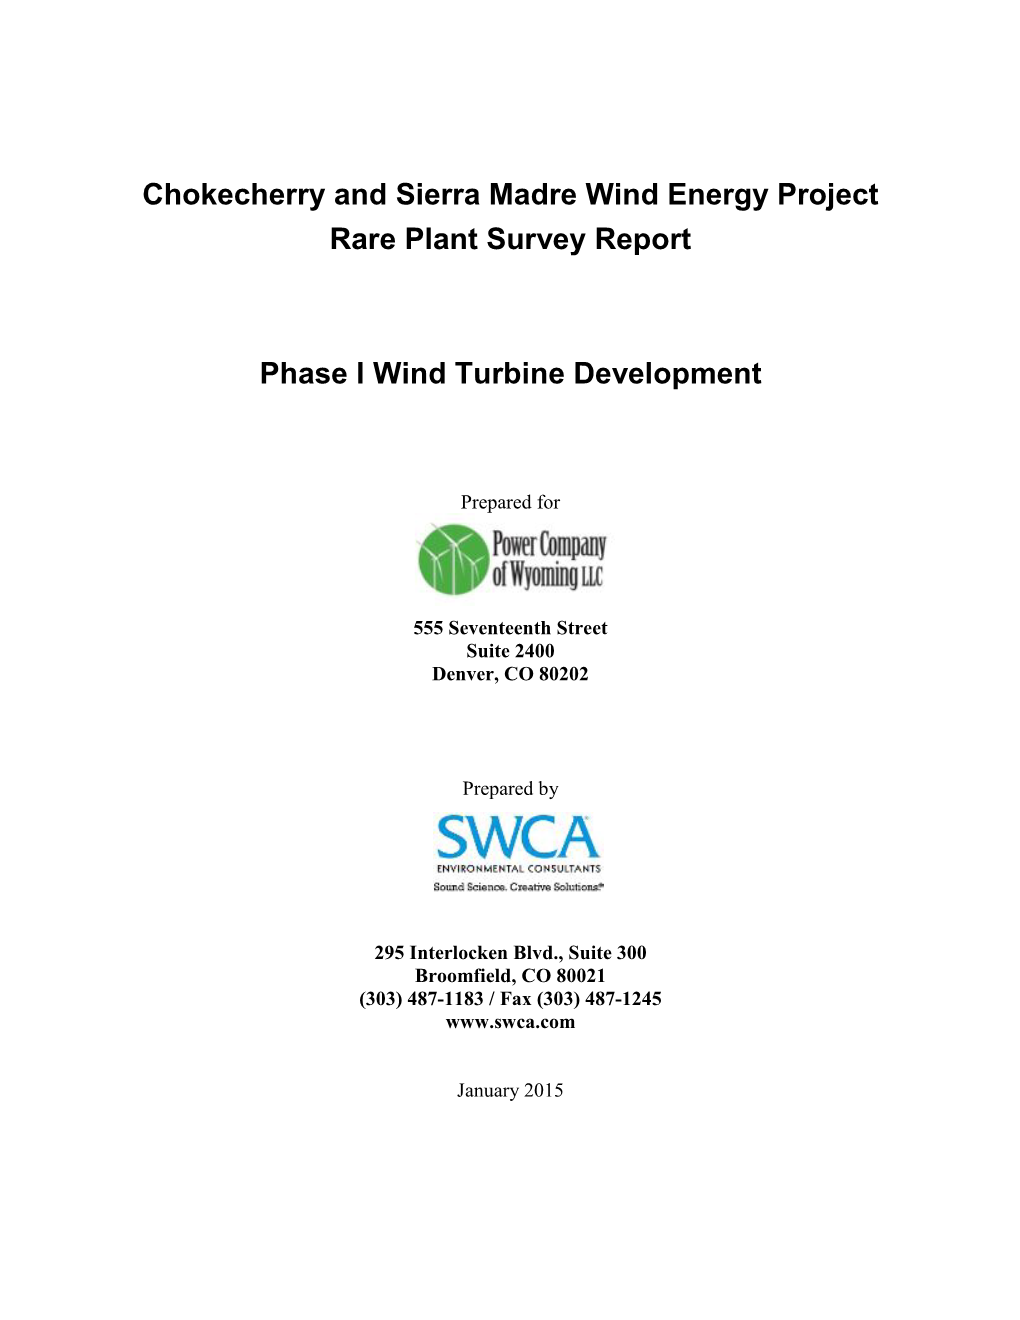 Chokecherry and Sierra Madre Wind Energy Project Rare Plant Survey Report